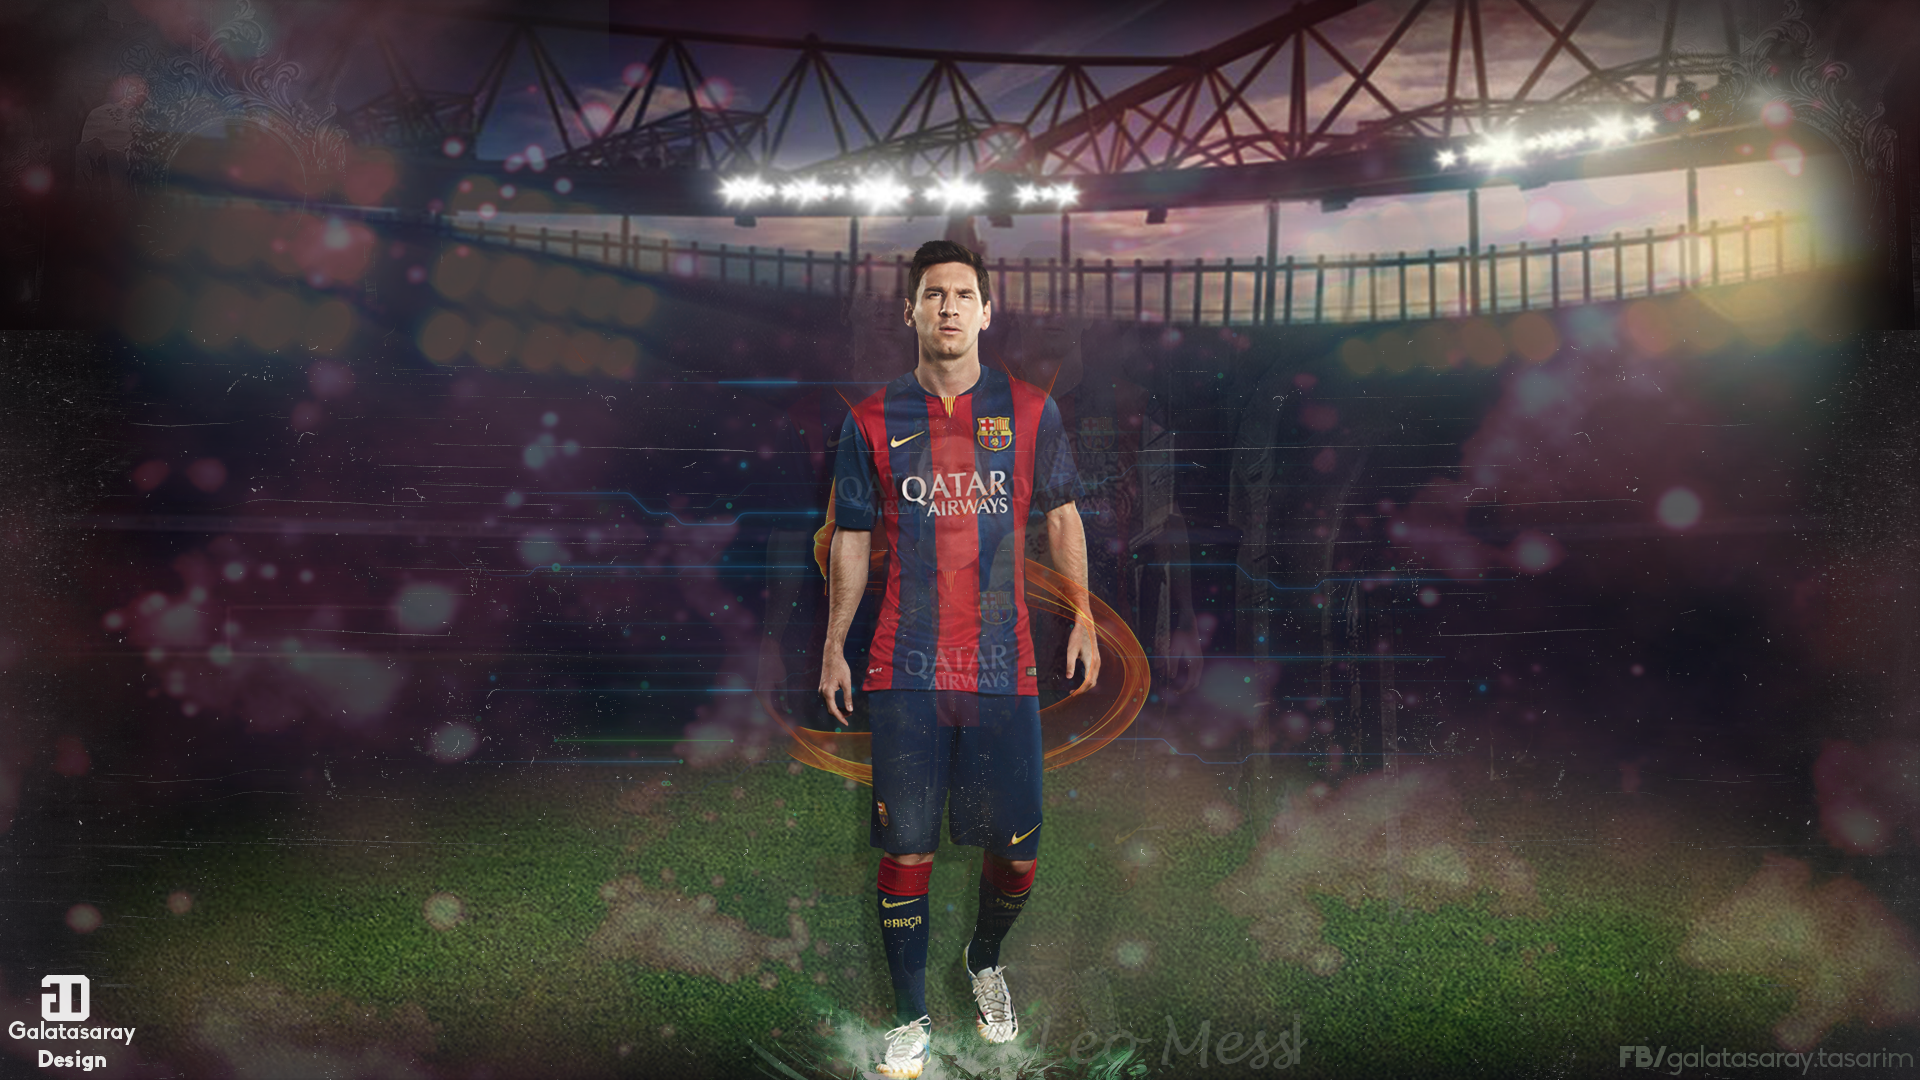 Lionel Messi 2014 2015 Wallpaper by galatasaraydesign 1920x1080